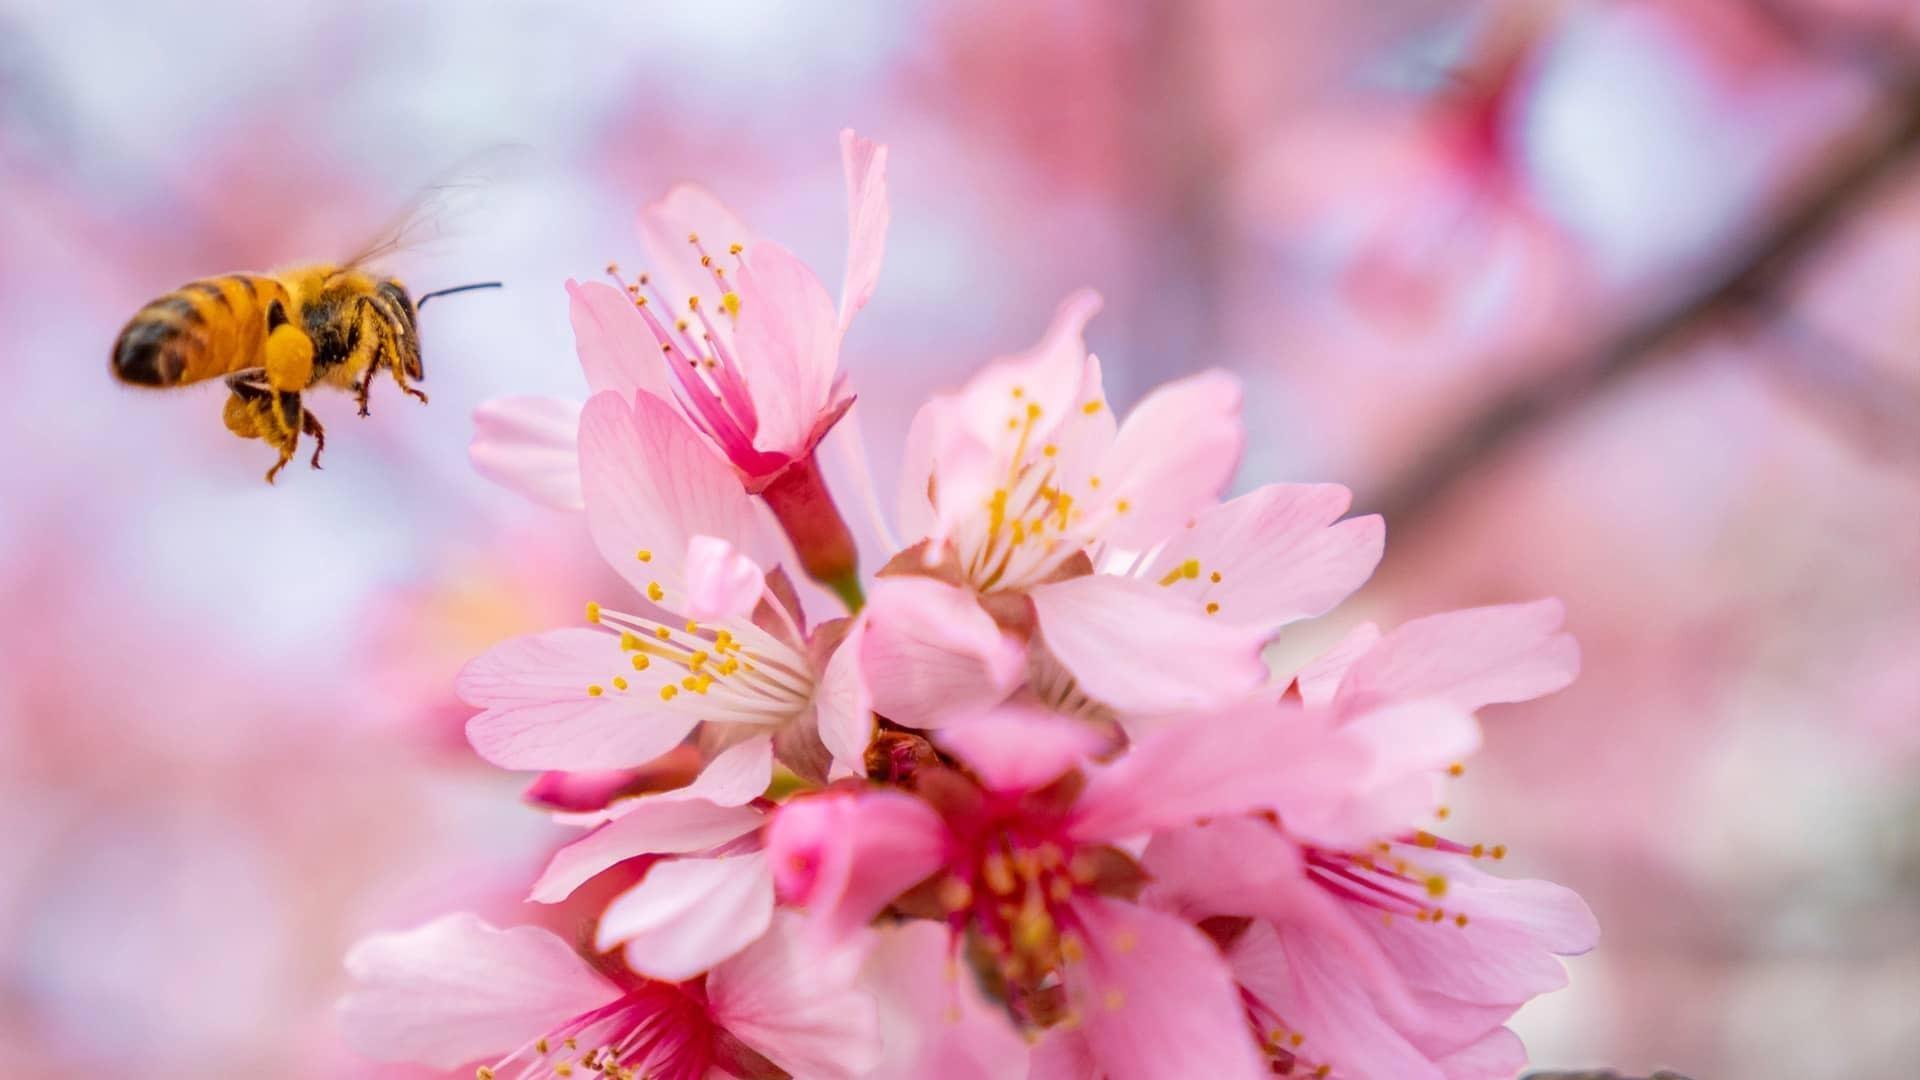 A bee hovers over a pink flower